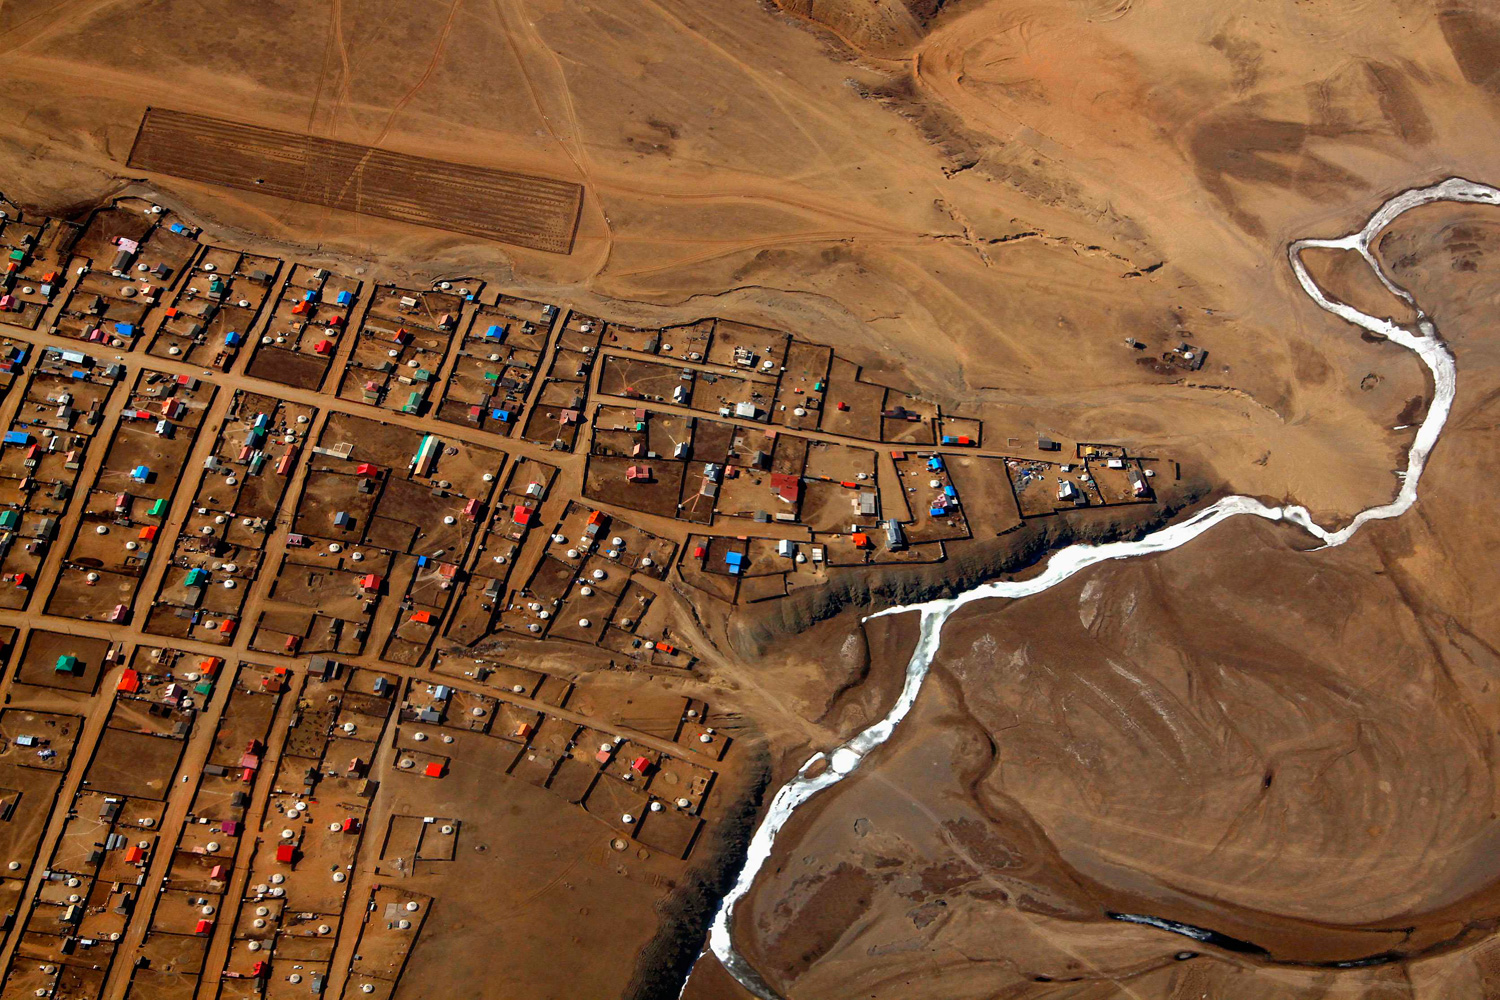 April 3, 2012. A frozen river is seen next to a group of houses located on the outskirts of the Mongolian capital city of Ulaanbaatar.